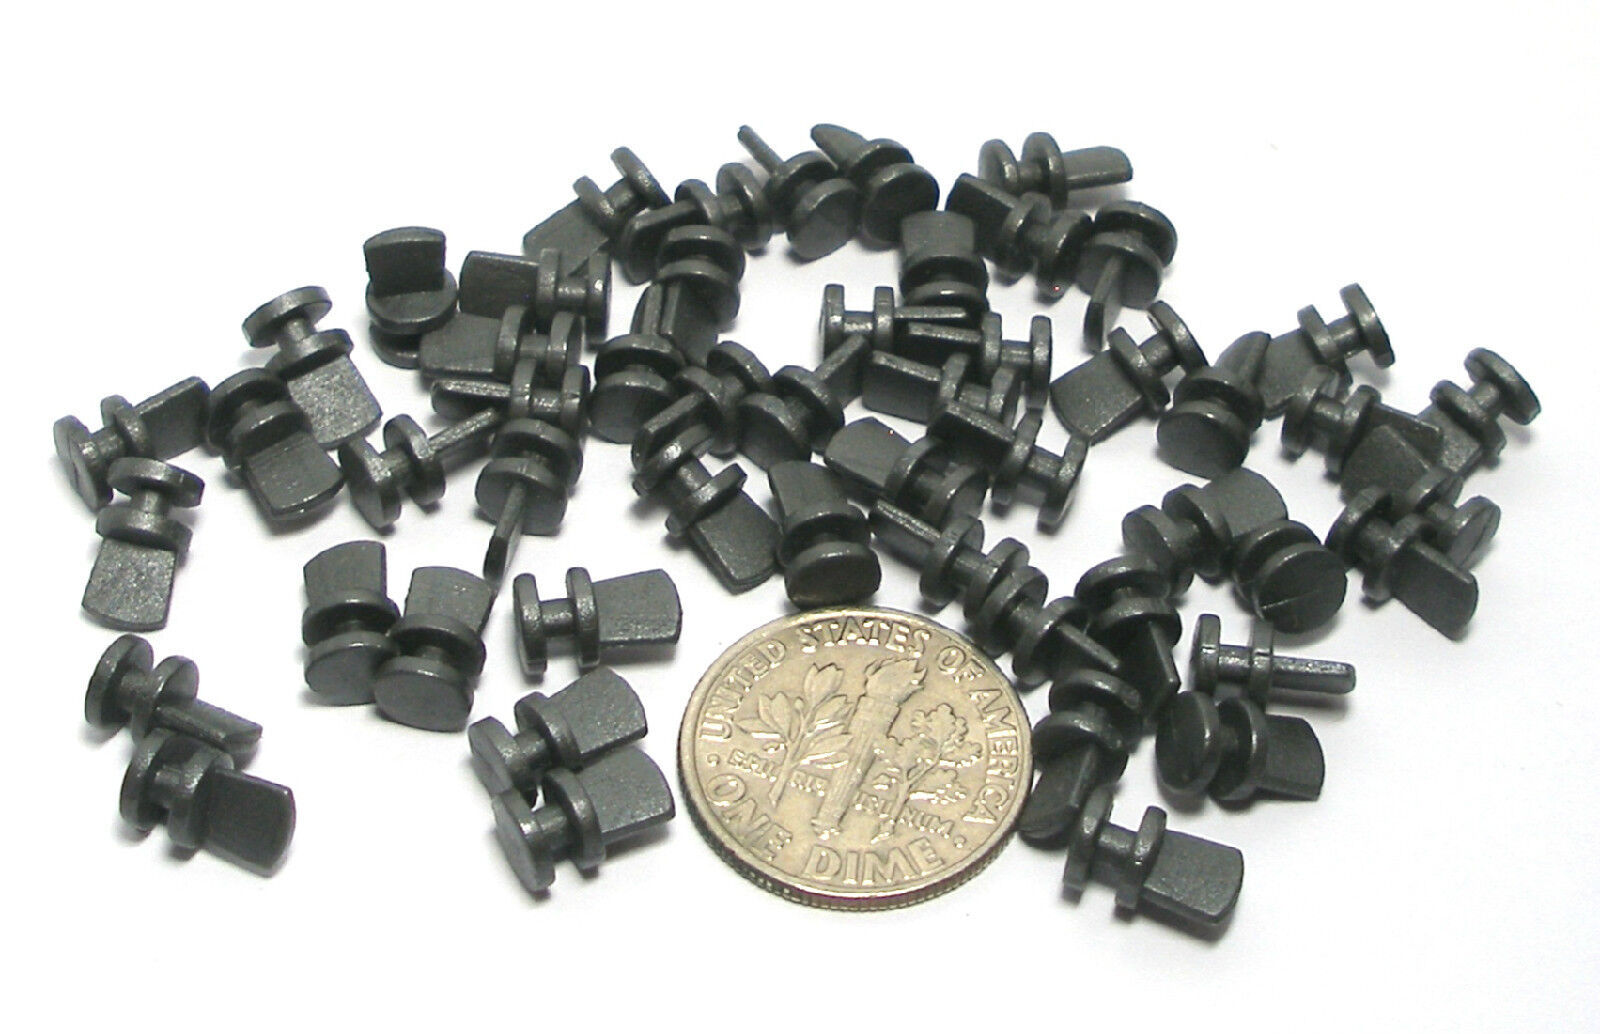 48pc Vintage Aurora AFX G+ Slot Car Chassis Fin Style PLASTIC GUIDE PINS 8782 A - $19.99